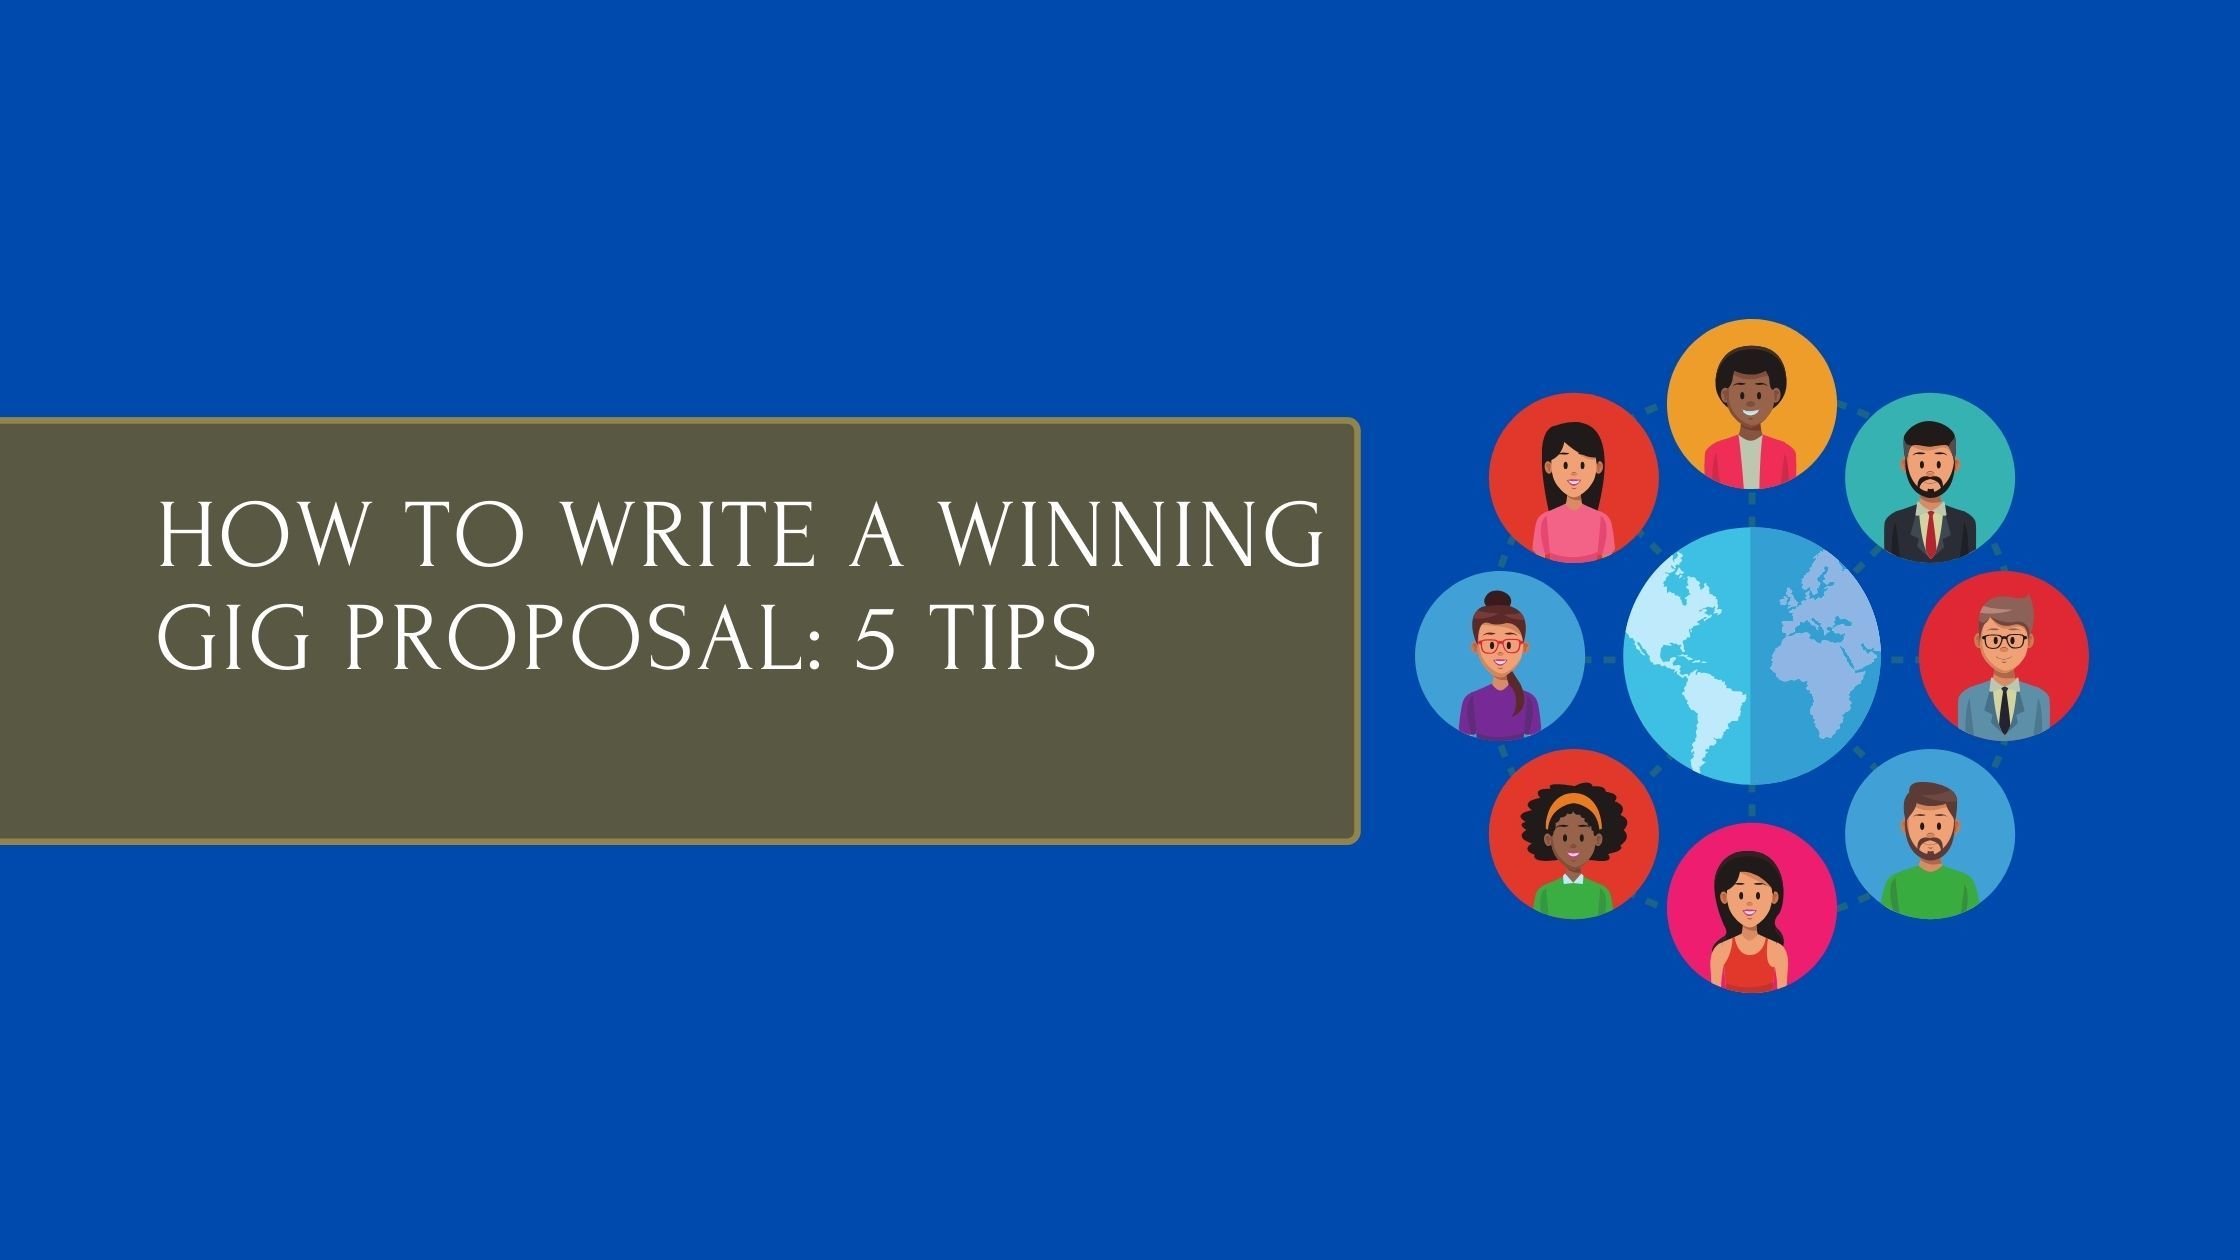 How To Write A Winning Gig Proposal: 5 Tips